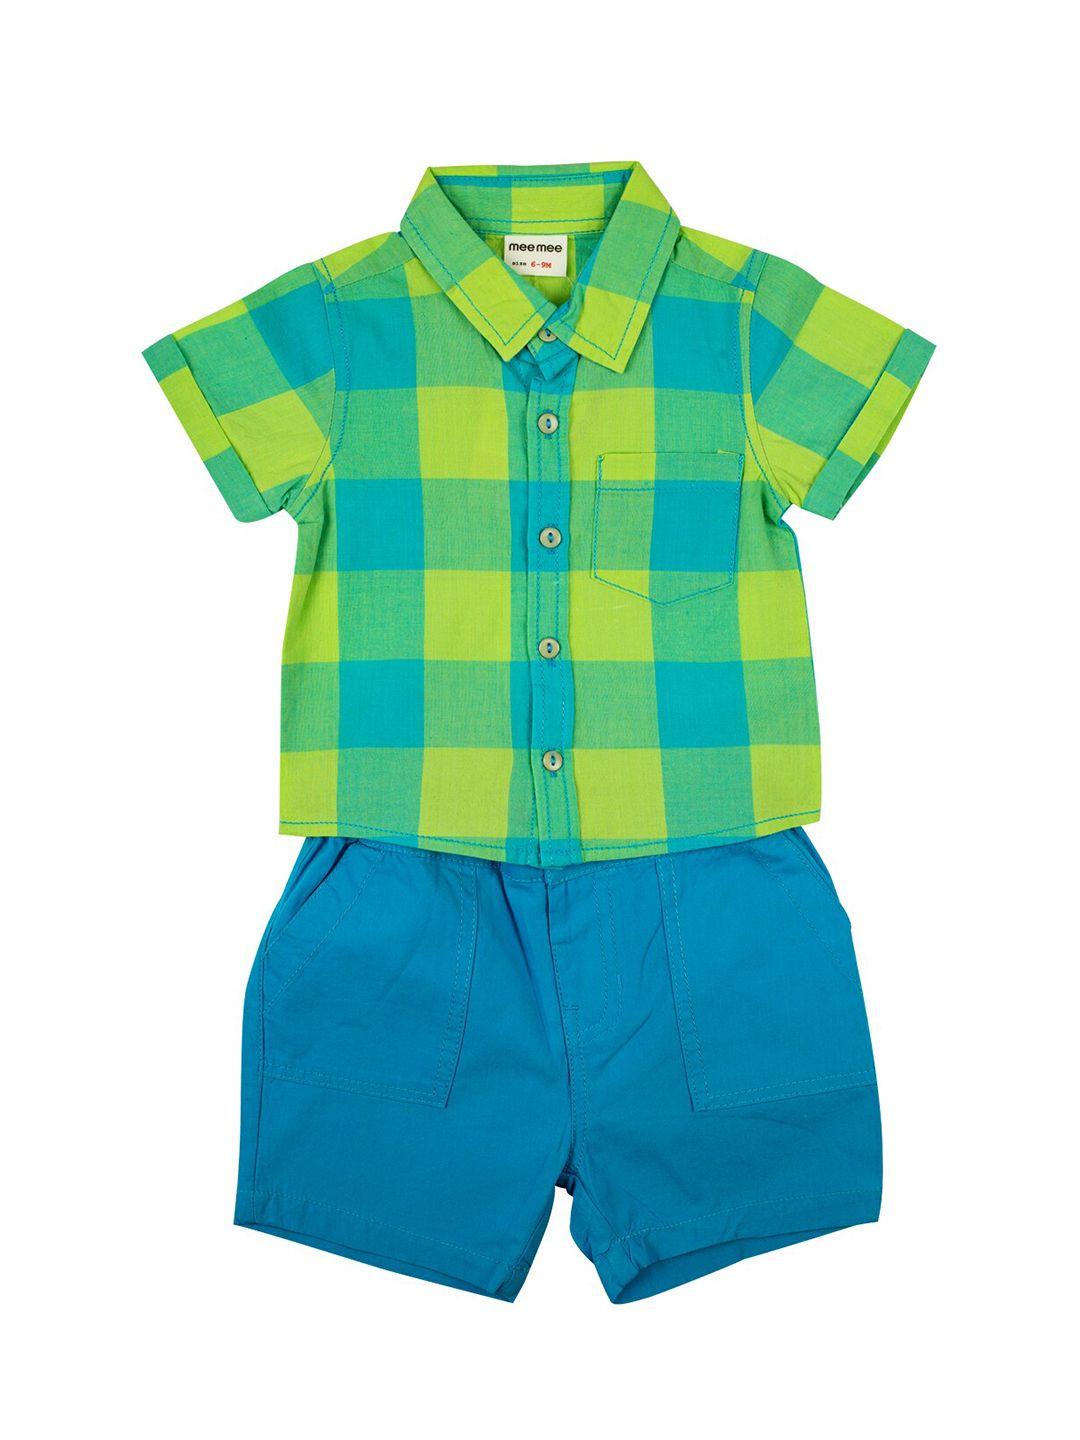 MeeMee Boys Lime Green & Turquoise Blue Checked Shirt with Shorts